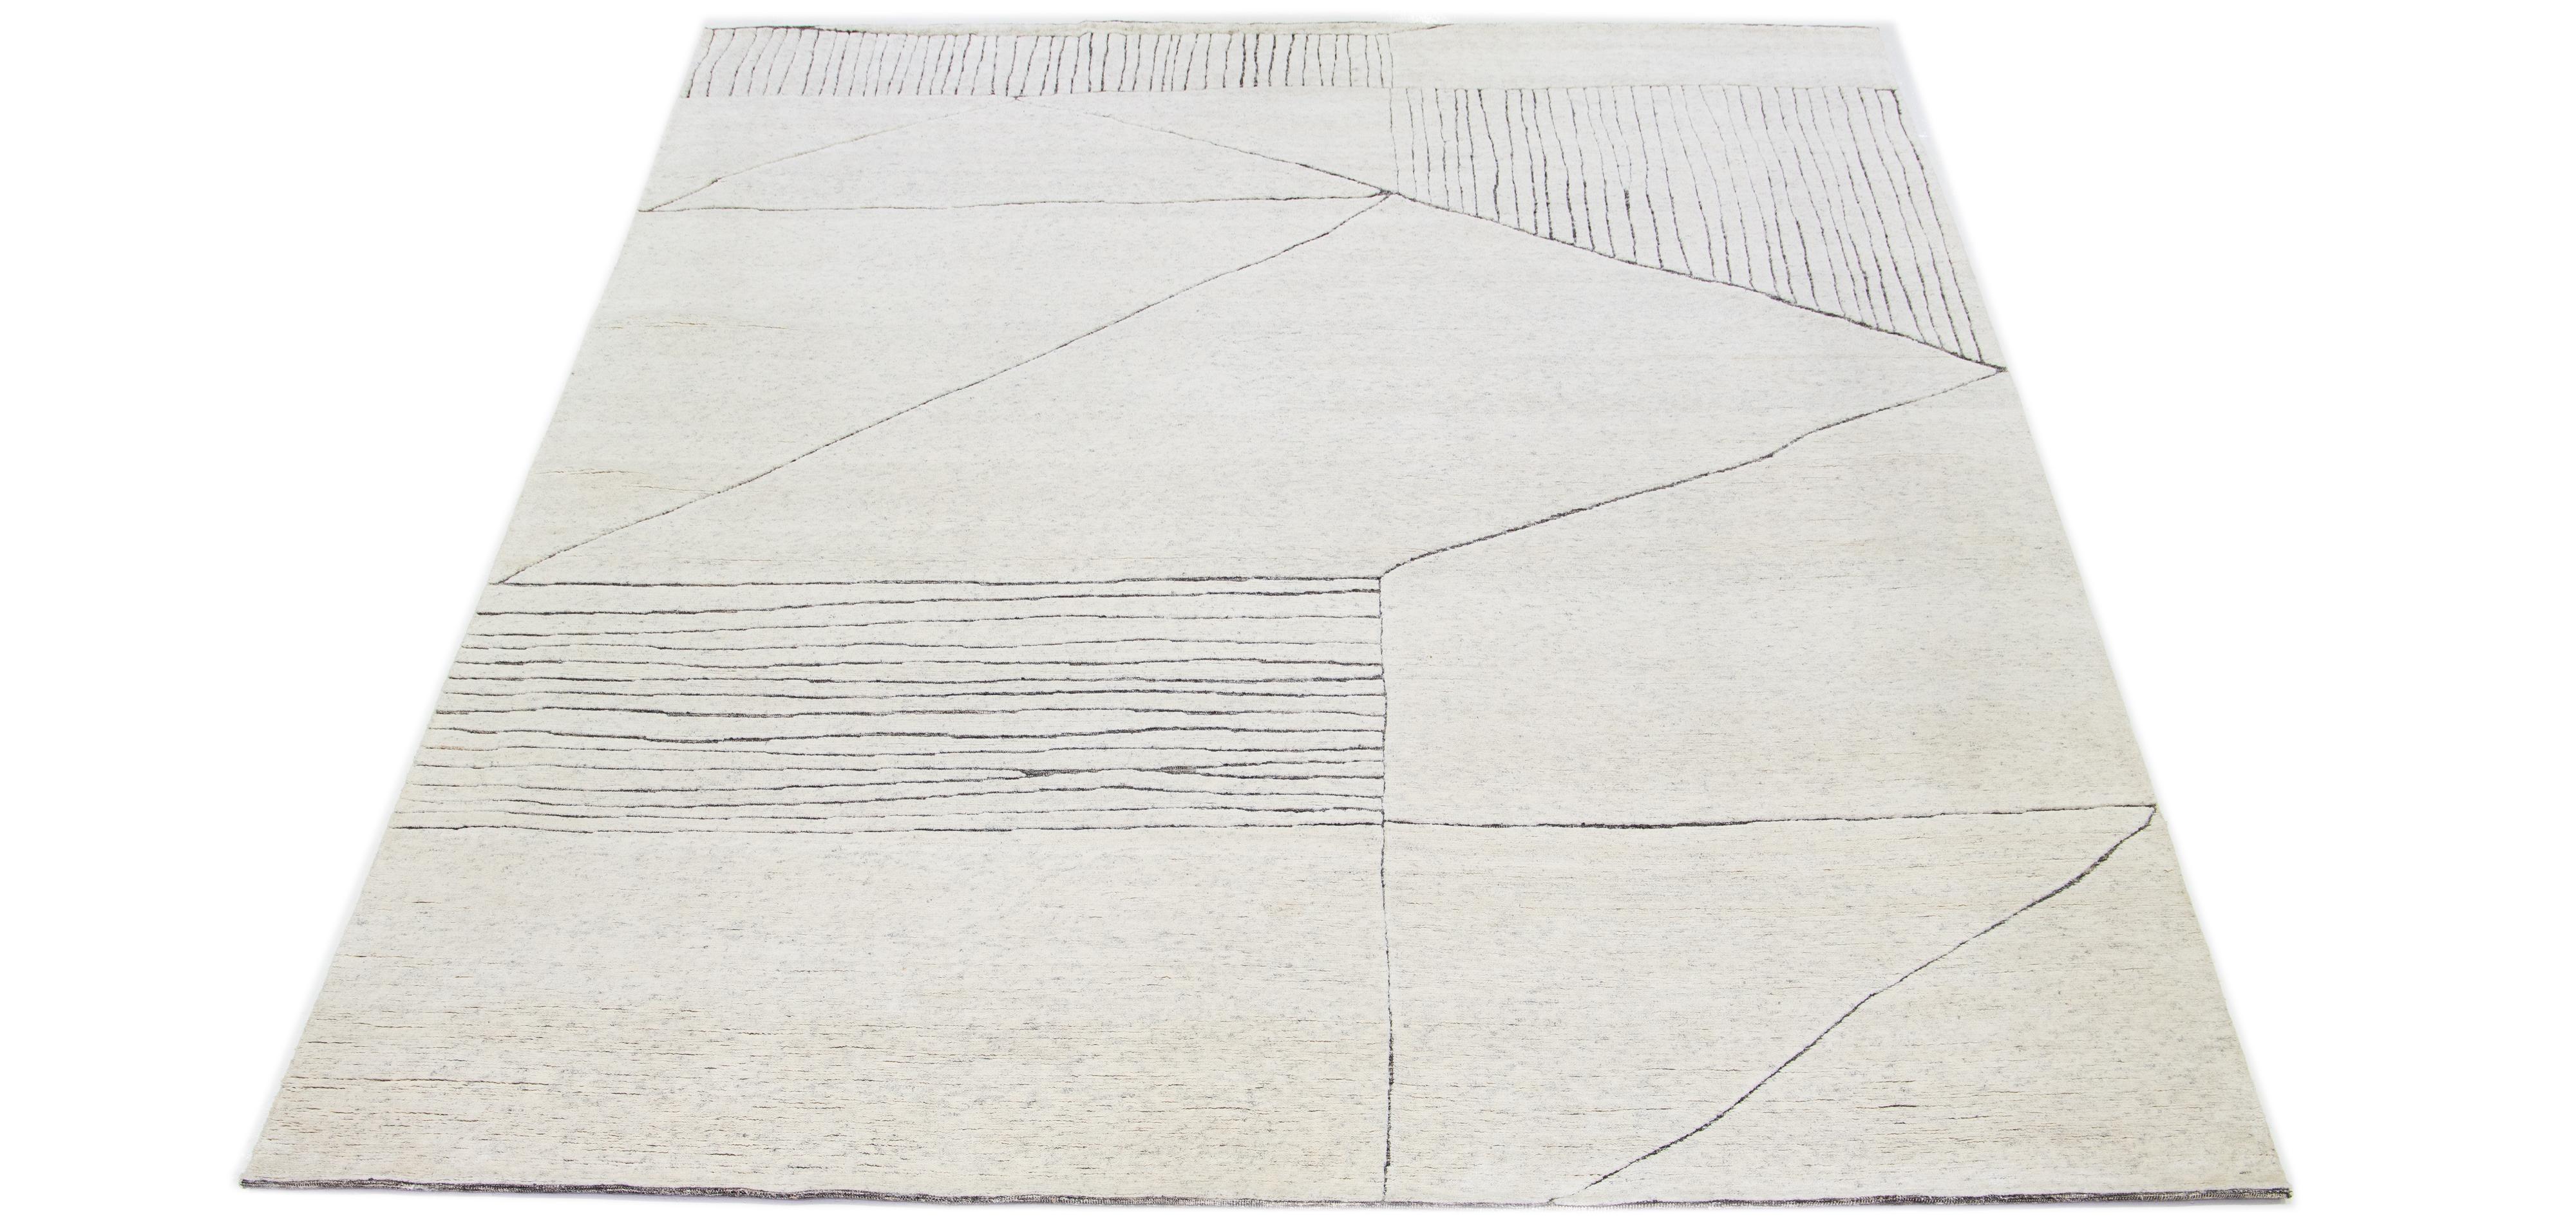 This luxurious wool rug features a timeless Moroccan pattern in a contemporary abstract Minimalist style, utilizing beige tones to create a sleek and modern look. It is crafted using traditional hand-knotting techniques, ensuring exceptional quality